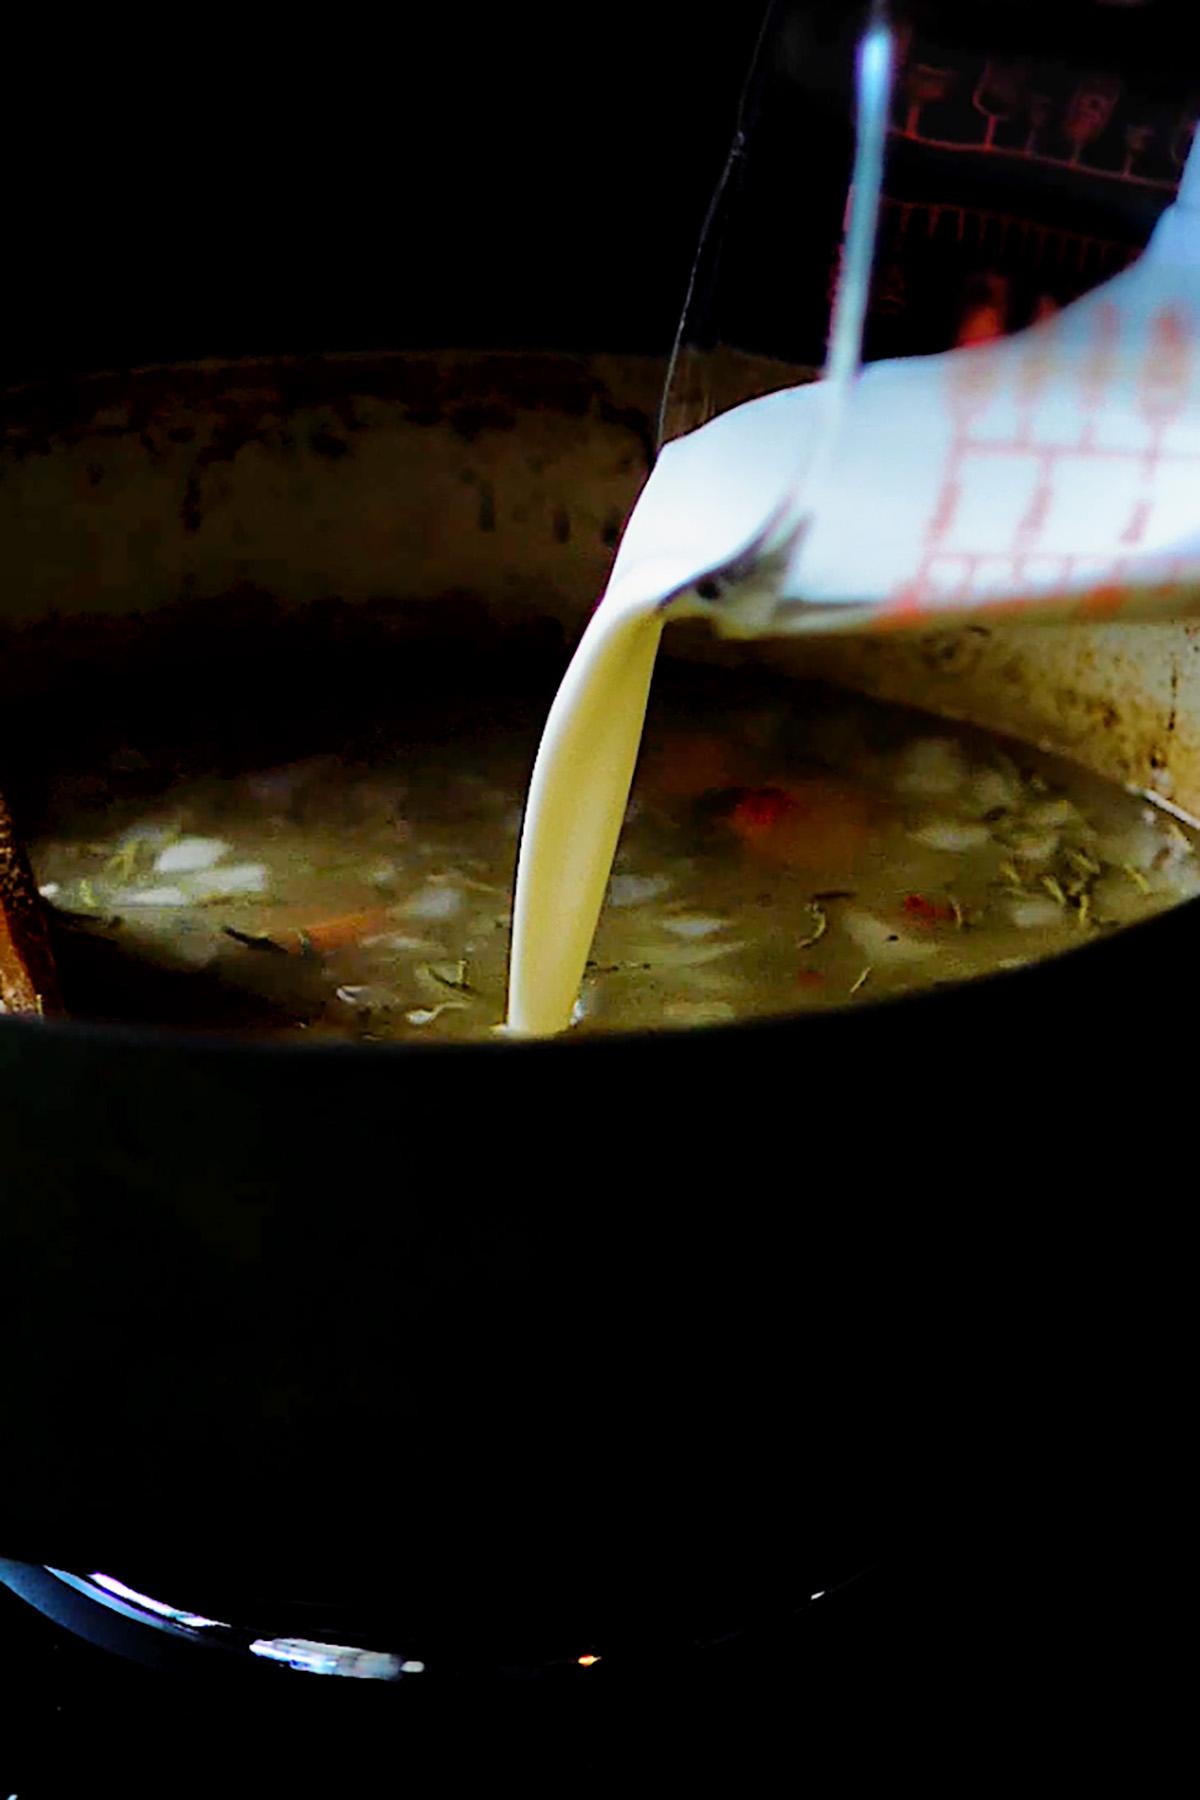 Cream being added to chicken soup in a dutch oven.